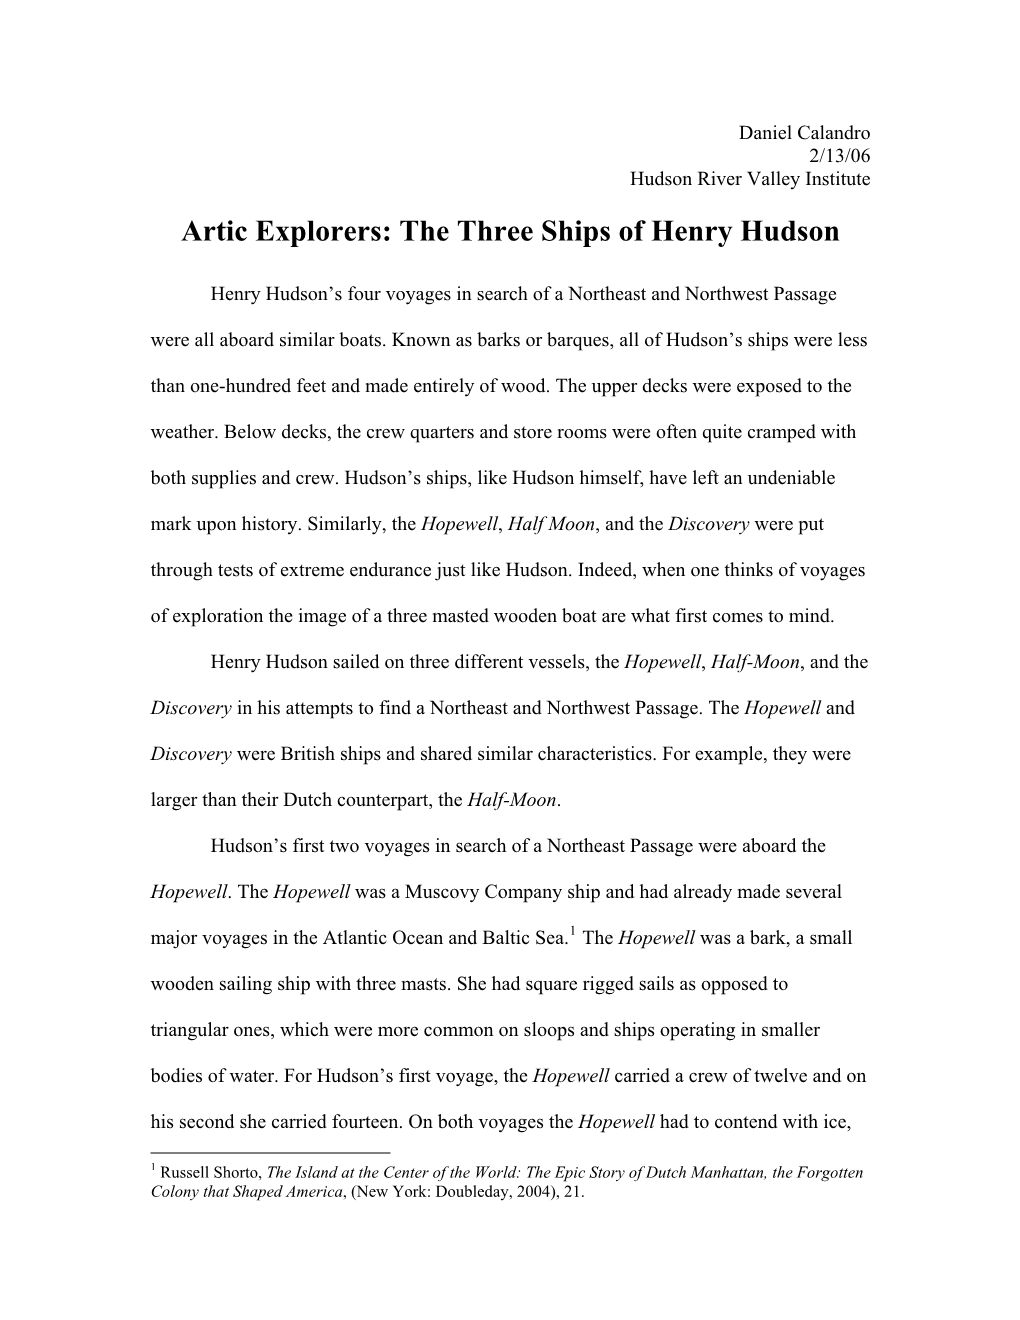 Artic Explorers: the Three Ships of Henry Hudson